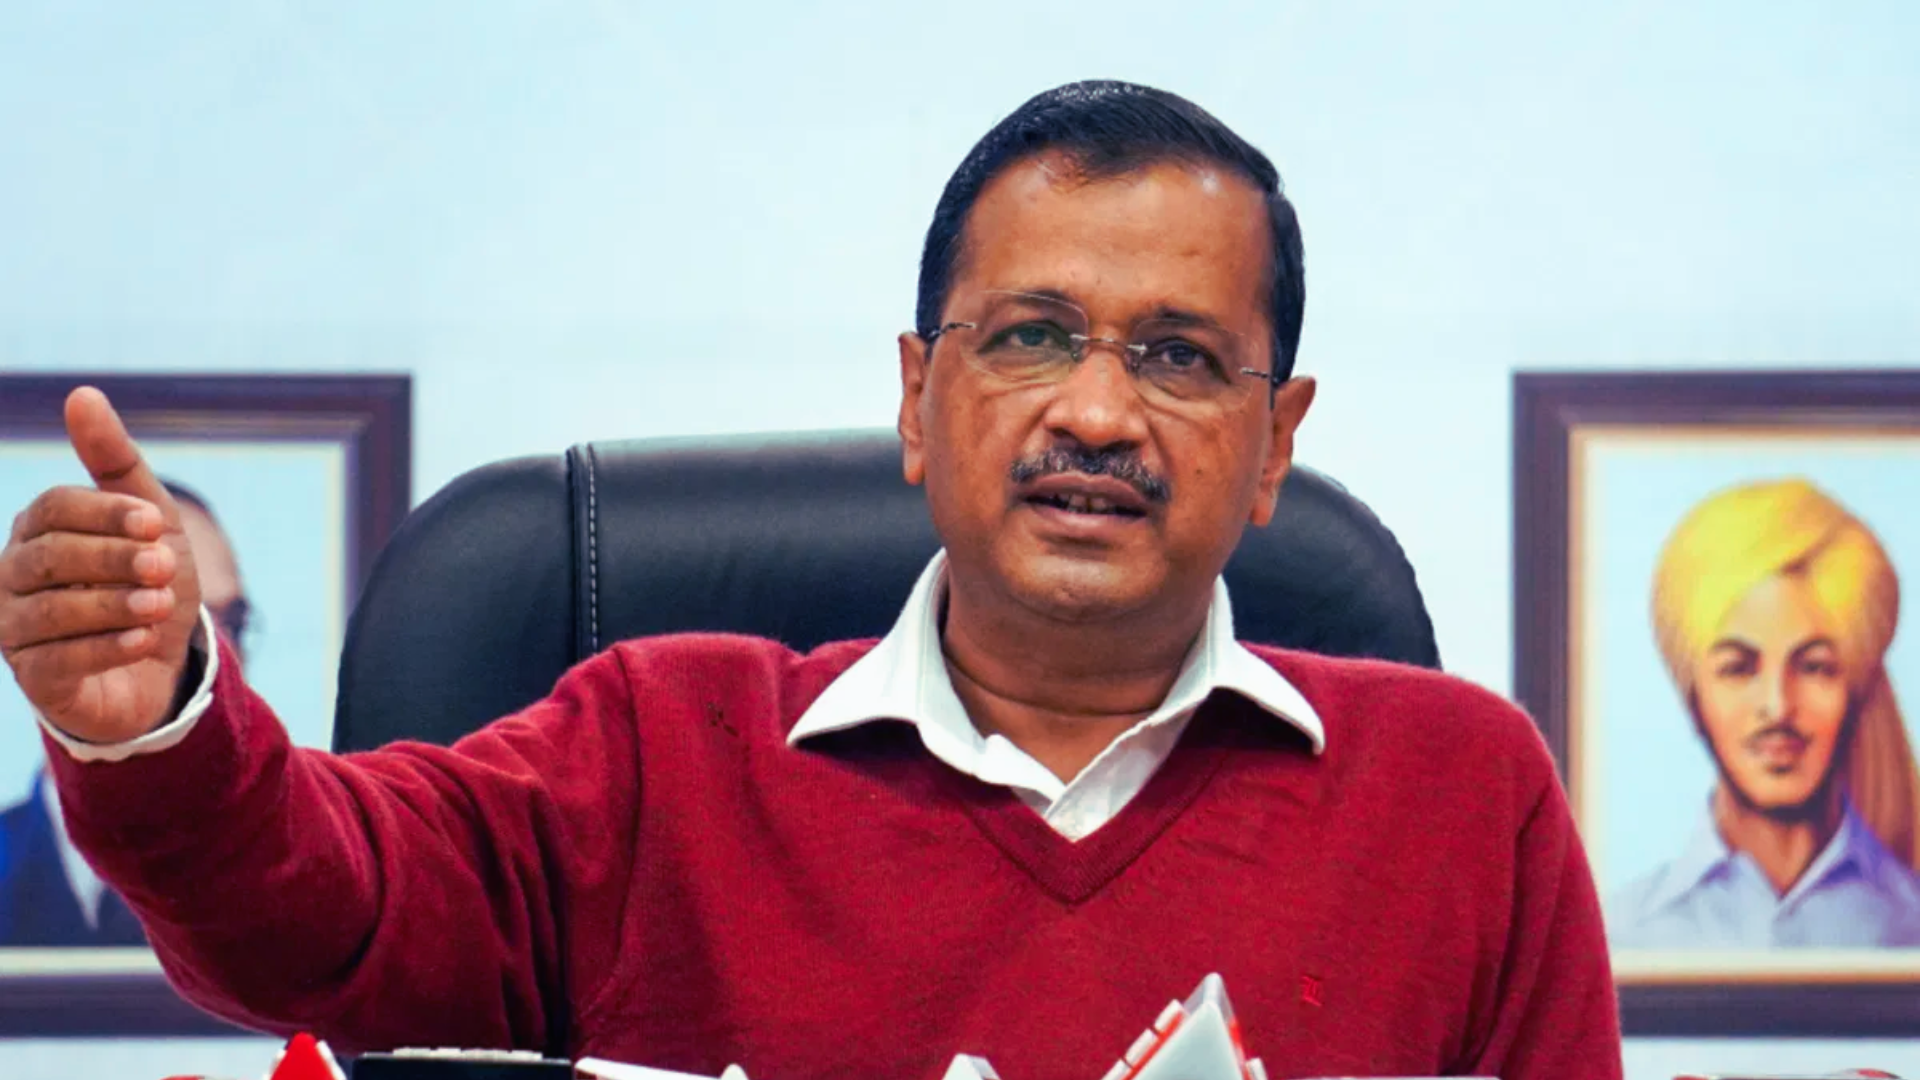 Court Seals To 7 Days Extension of Kejriwal’s Custody, Kejriwal To Remain CM From Jail